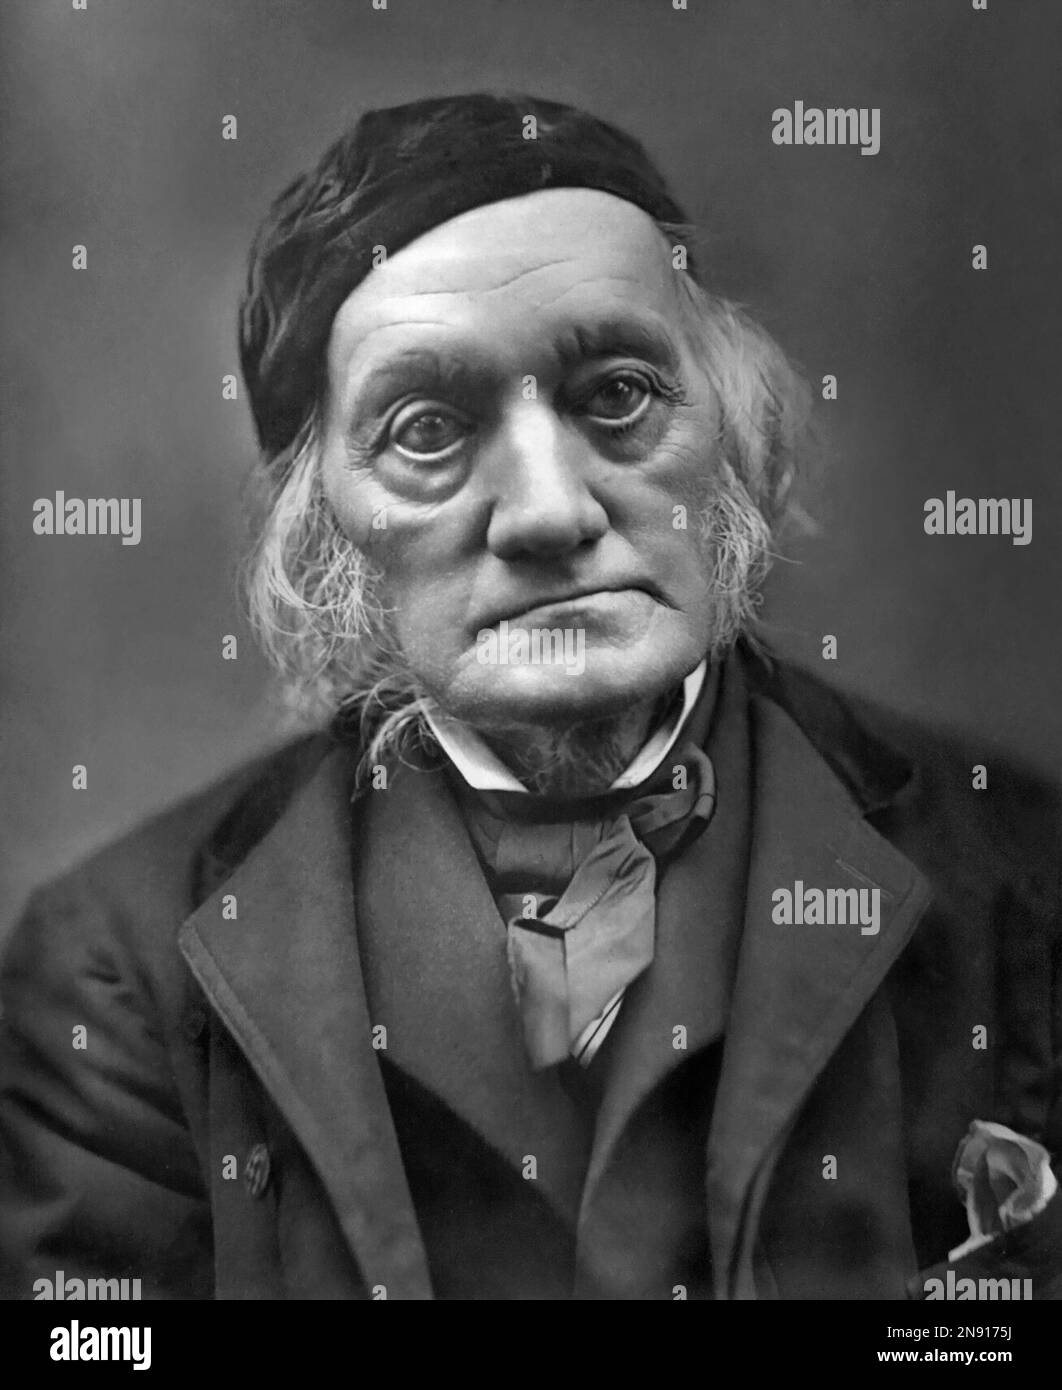 Sir Richard Owen (1804-1892), English biologist, comparative anatomist, paleontologist, and opponent of Darwin's theory of evolution by natural selection. Stock Photo